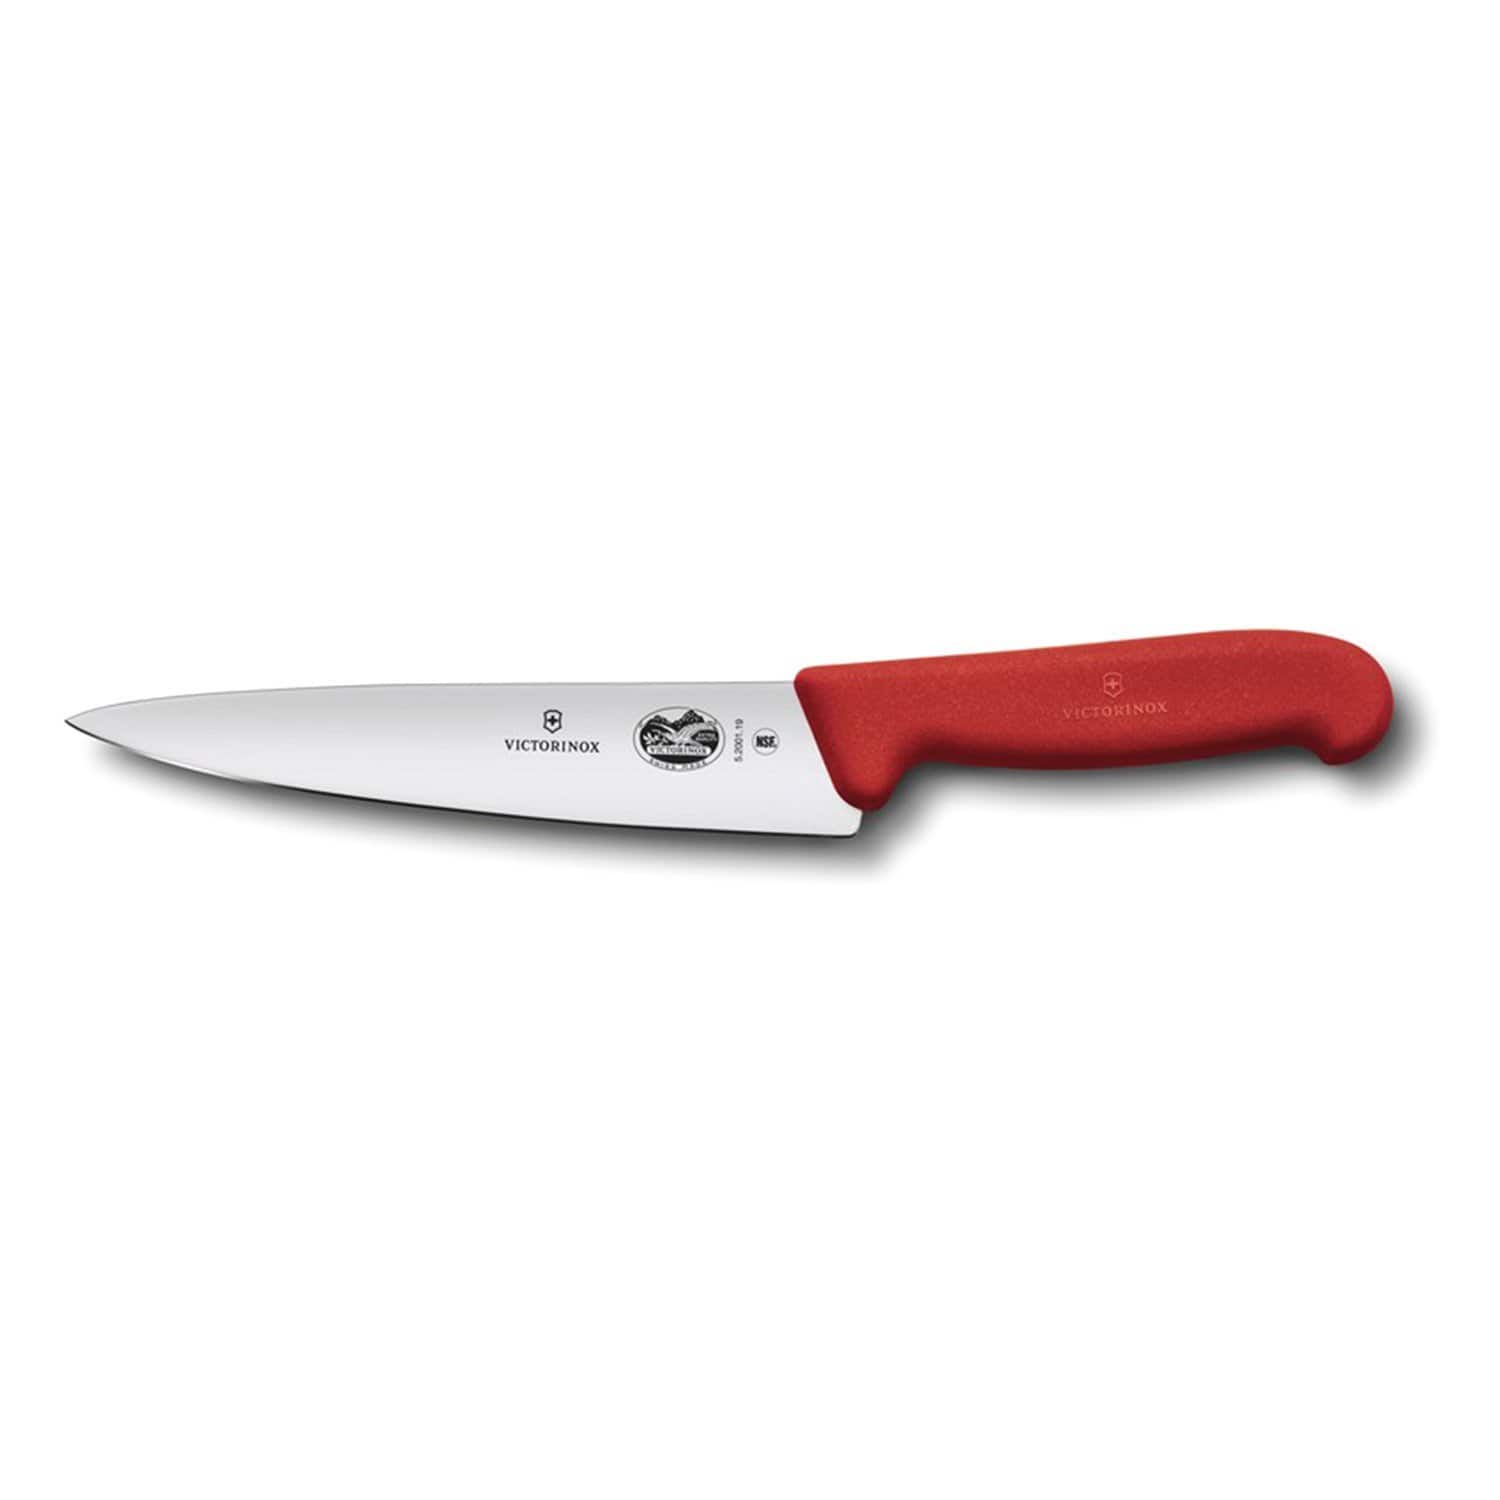 Victorinox Carving Knife - Red - 5.2001.25 - Jashanmal Home